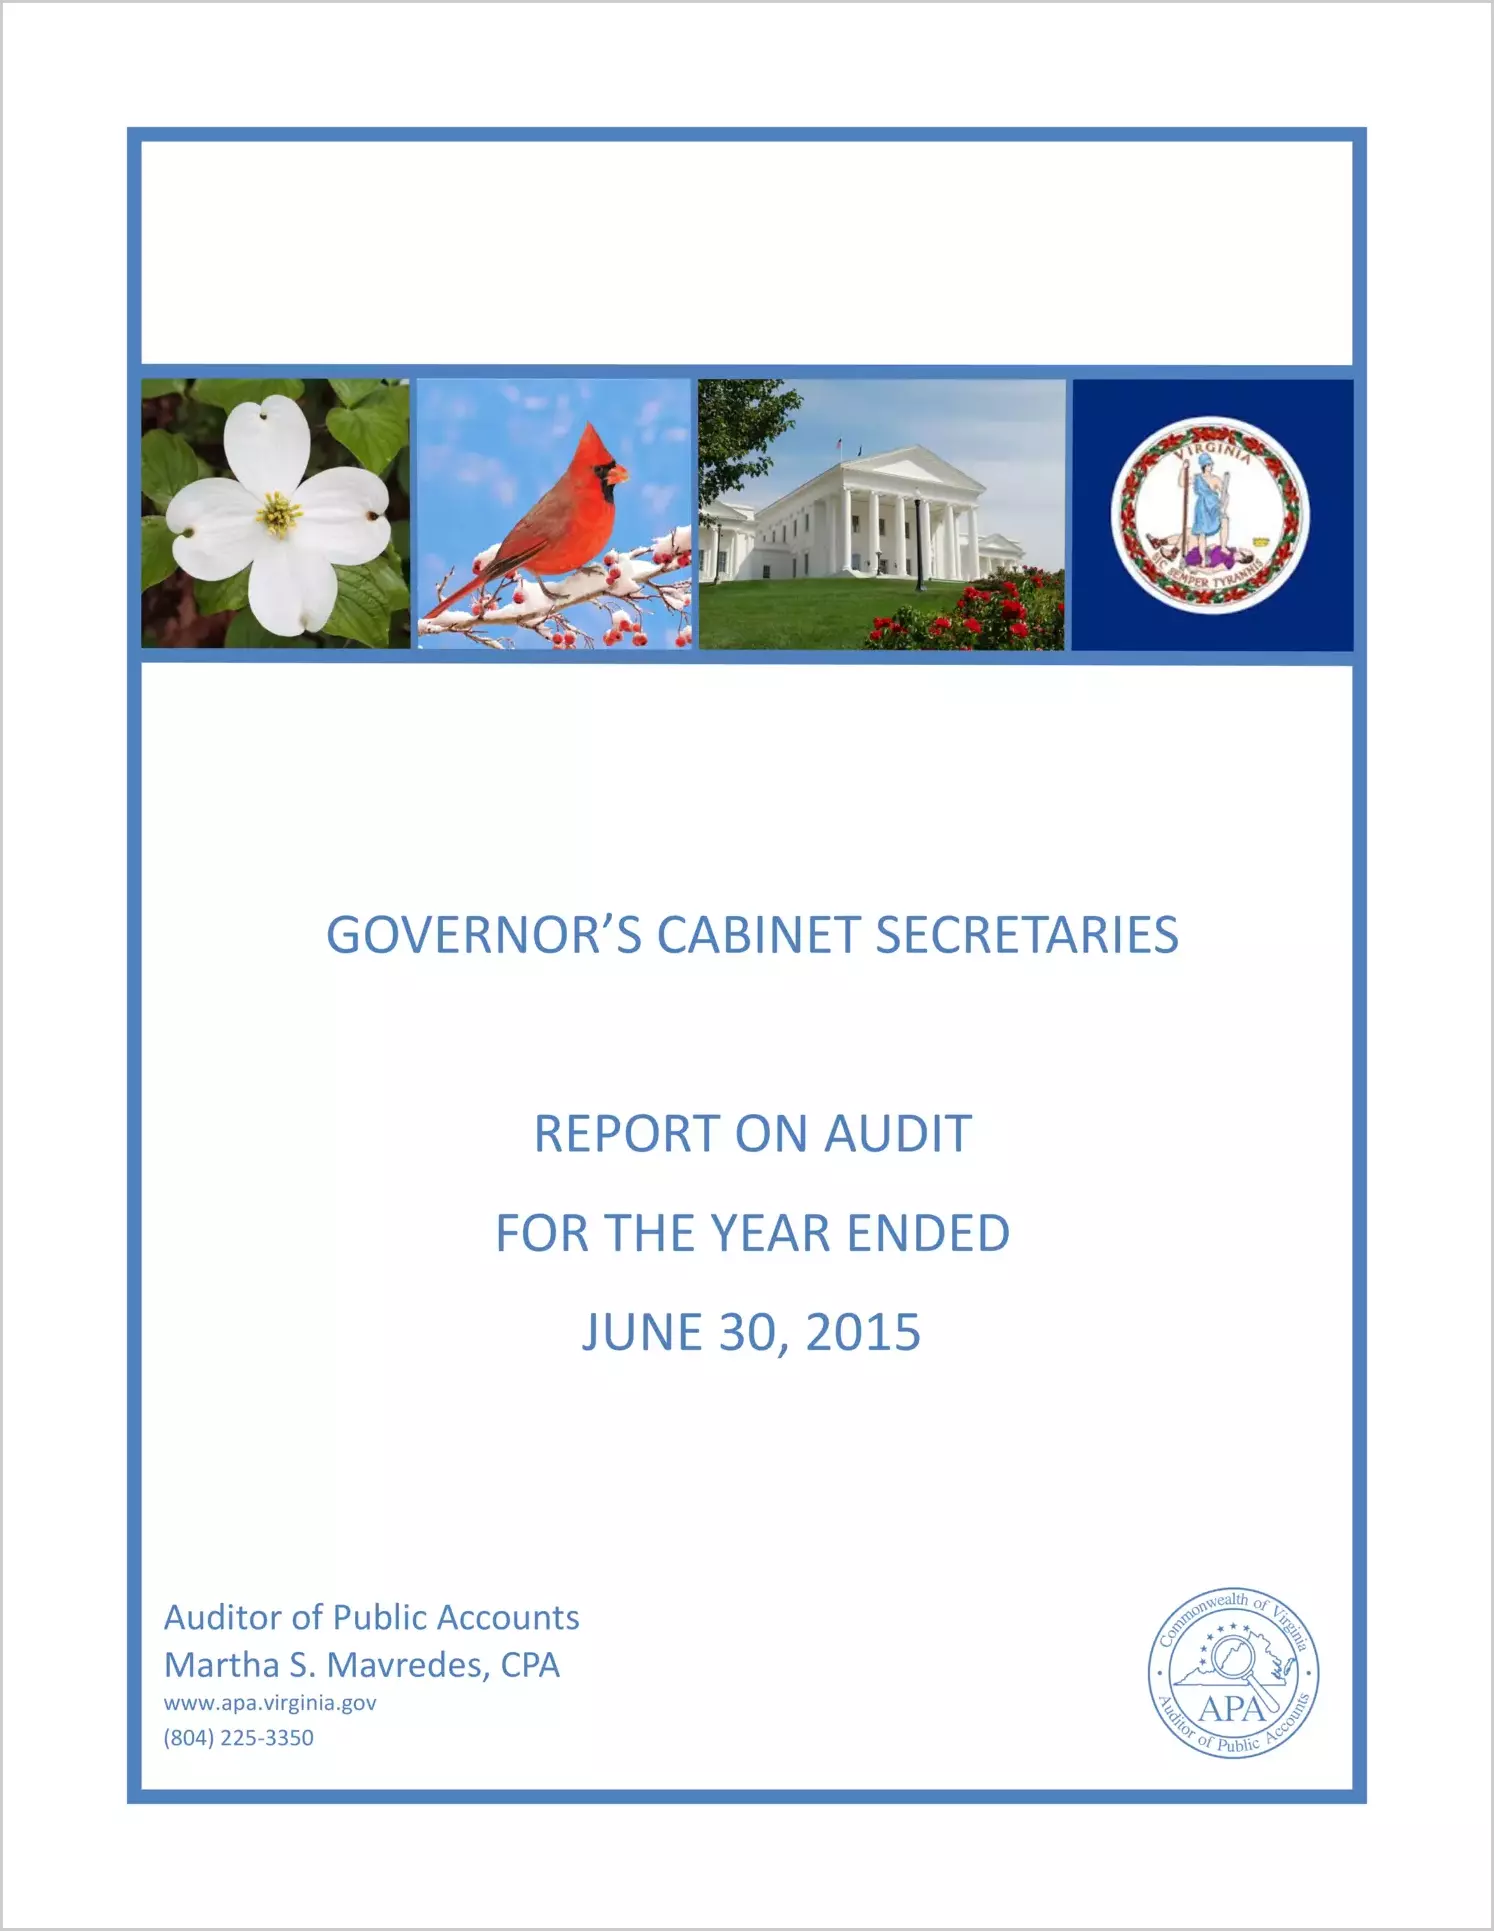 Governor's Cabinet Secretaries for the year ended June 30, 2015